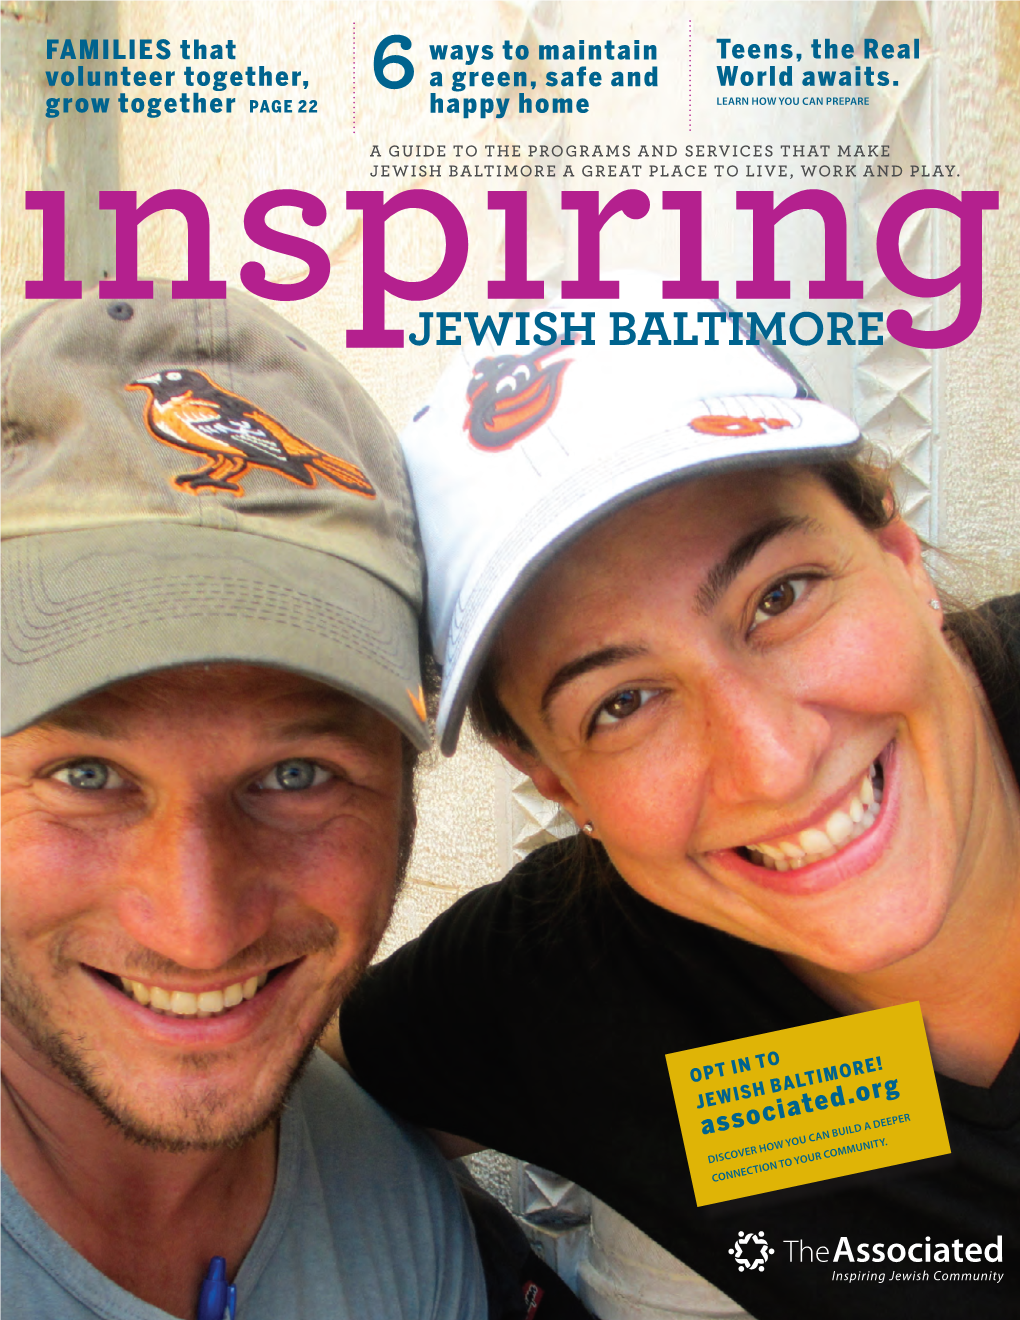 Jewish Baltimore a Great Place to Live, Work and Play